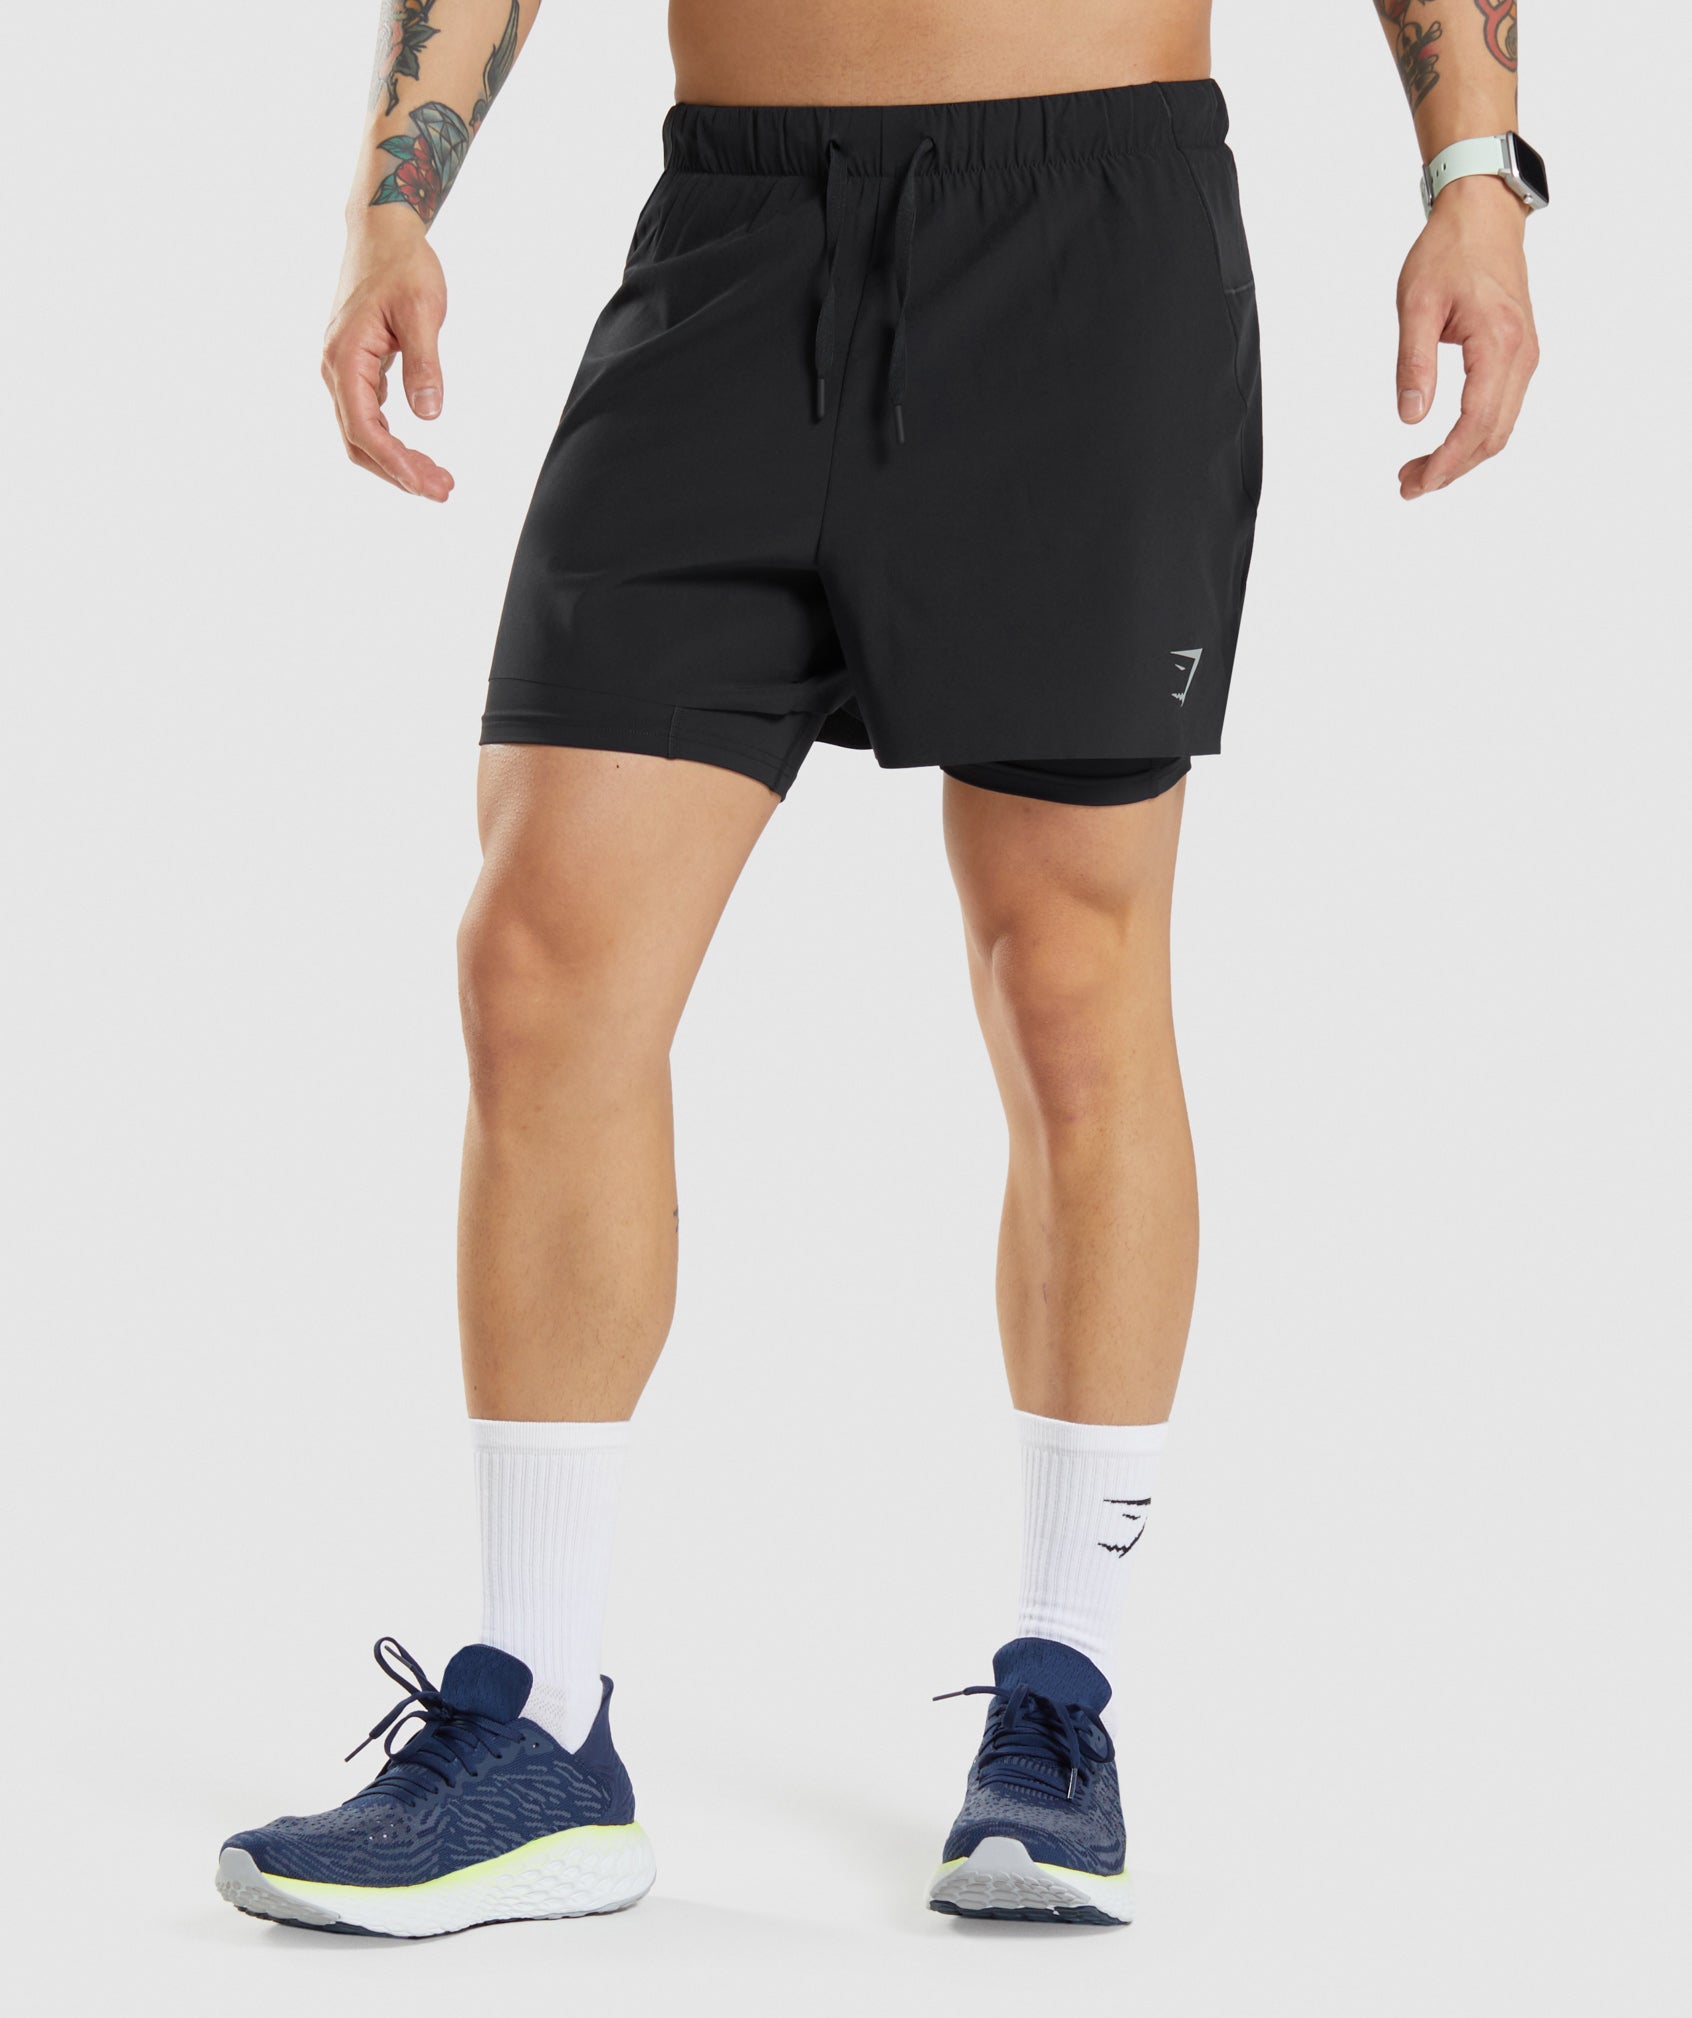 Speed 5" 2 In 1 Shorts in Black - view 1